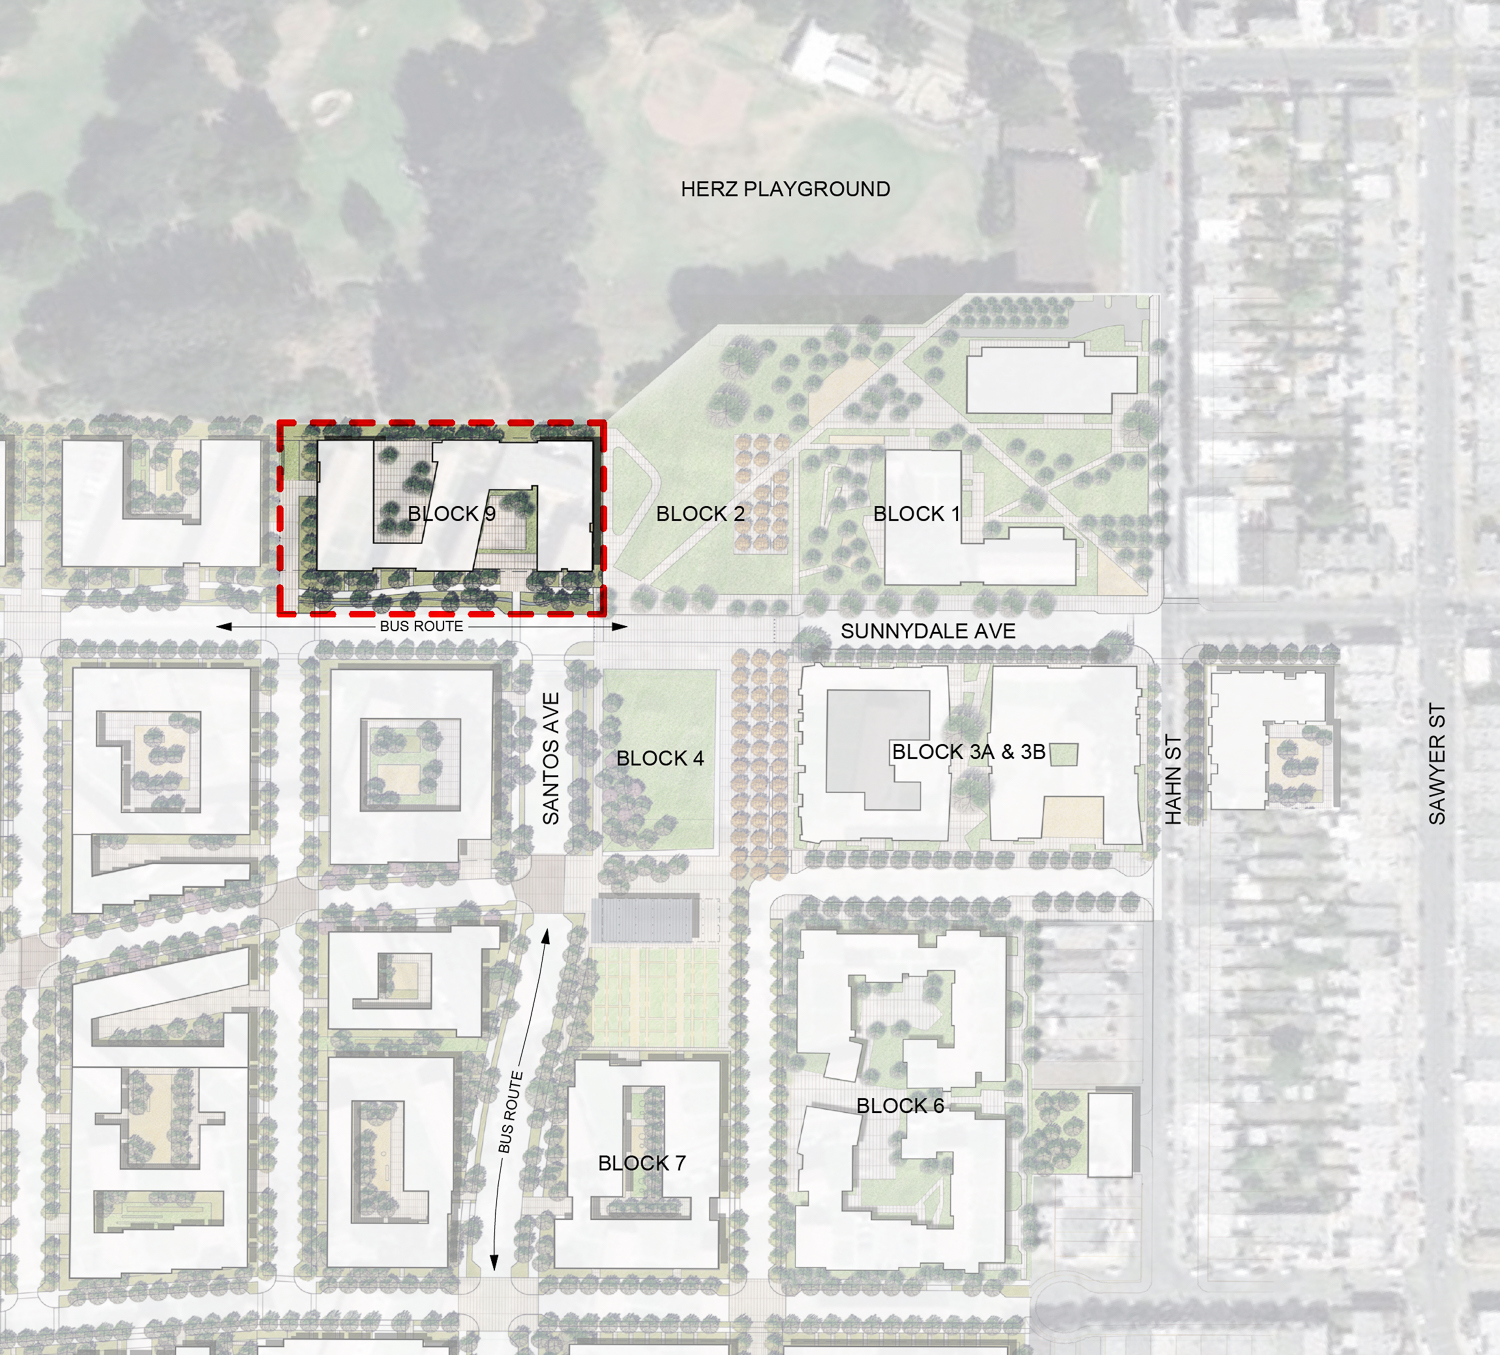 Sunnydale Block 9 in the Sunnydale overview map, rendering by VMWP and Kerman Morris Architects